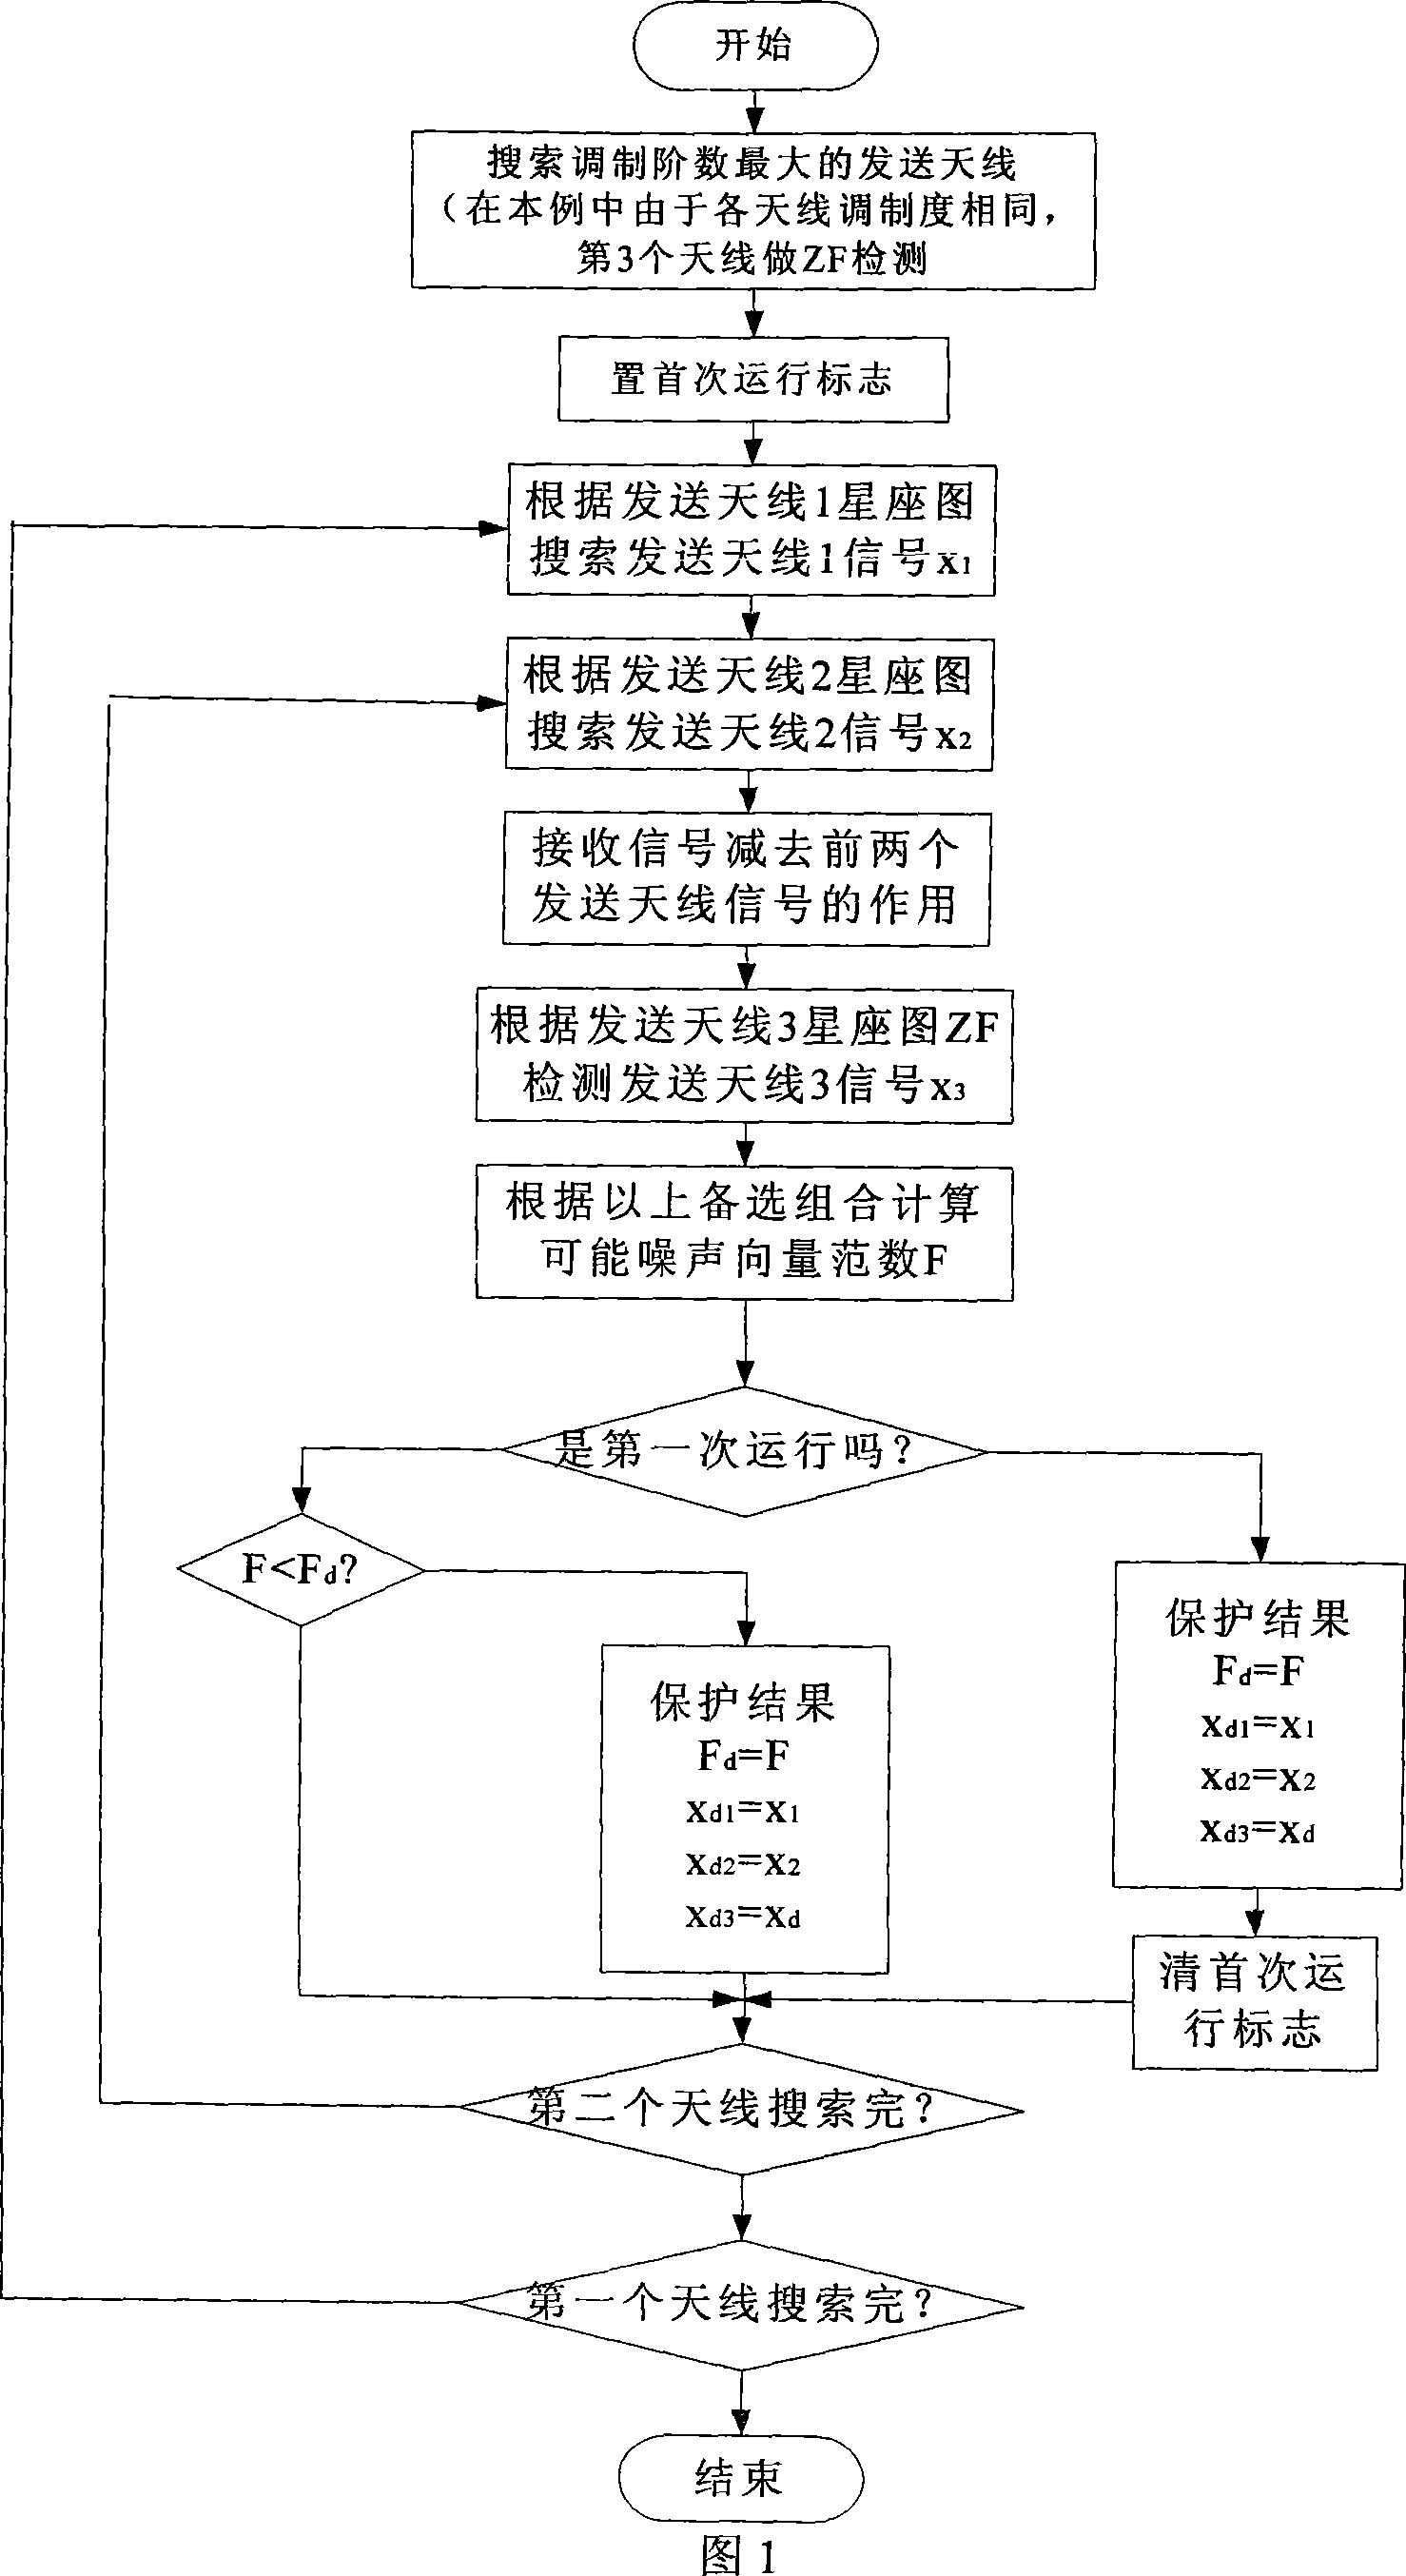 Maximum likelihood simplified detecting method for multi inputting and multi outputting antenna system space division multiplexing